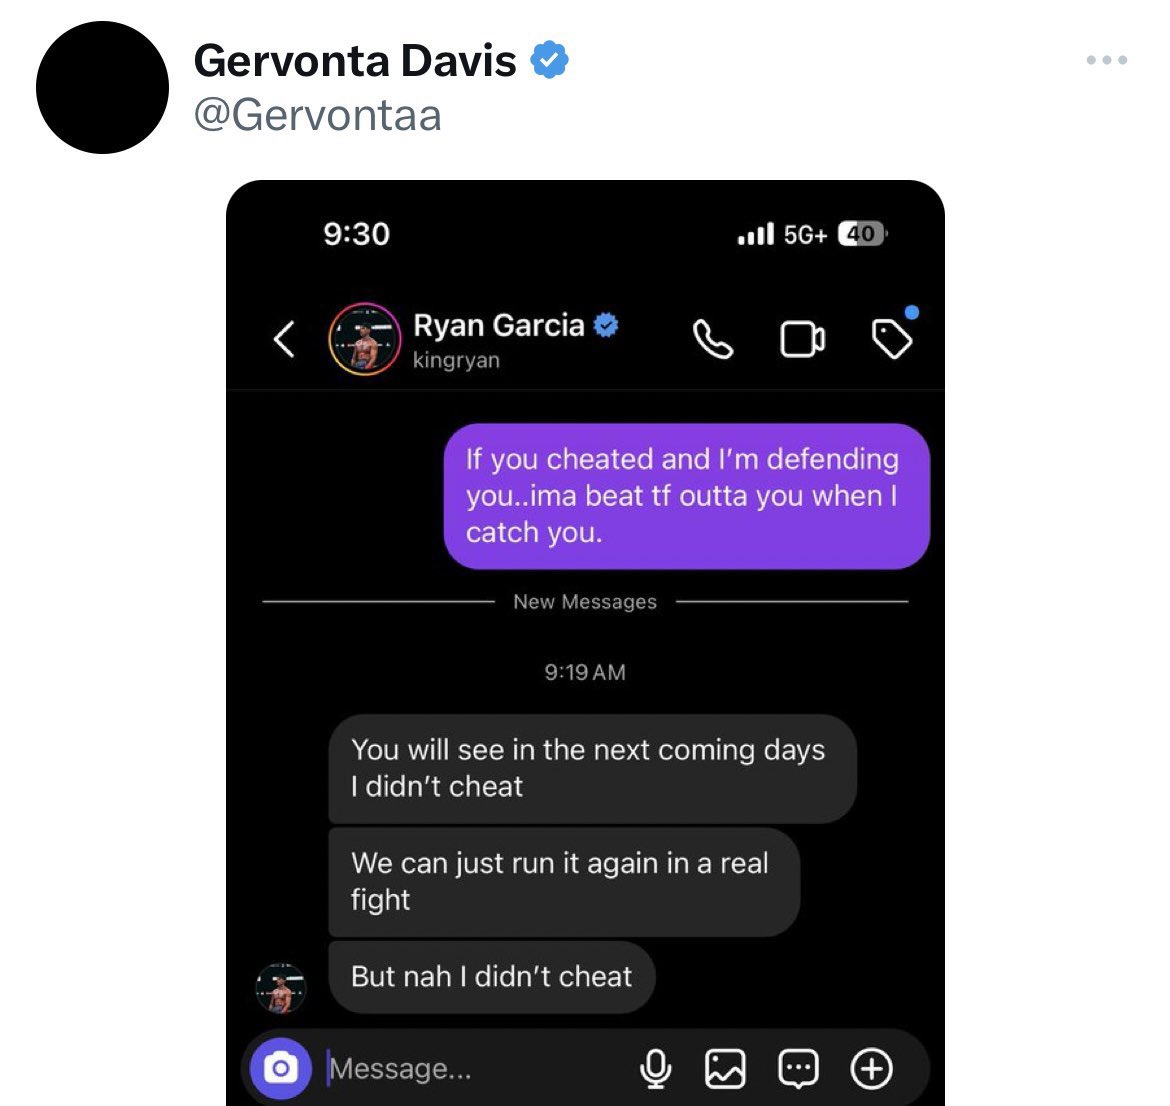 Gervonta Davis posting his DMs with Ryan Garcia about his positive drugs tests “if you cheated & I’m defending you.. imma beat tf outta u when u catch u”